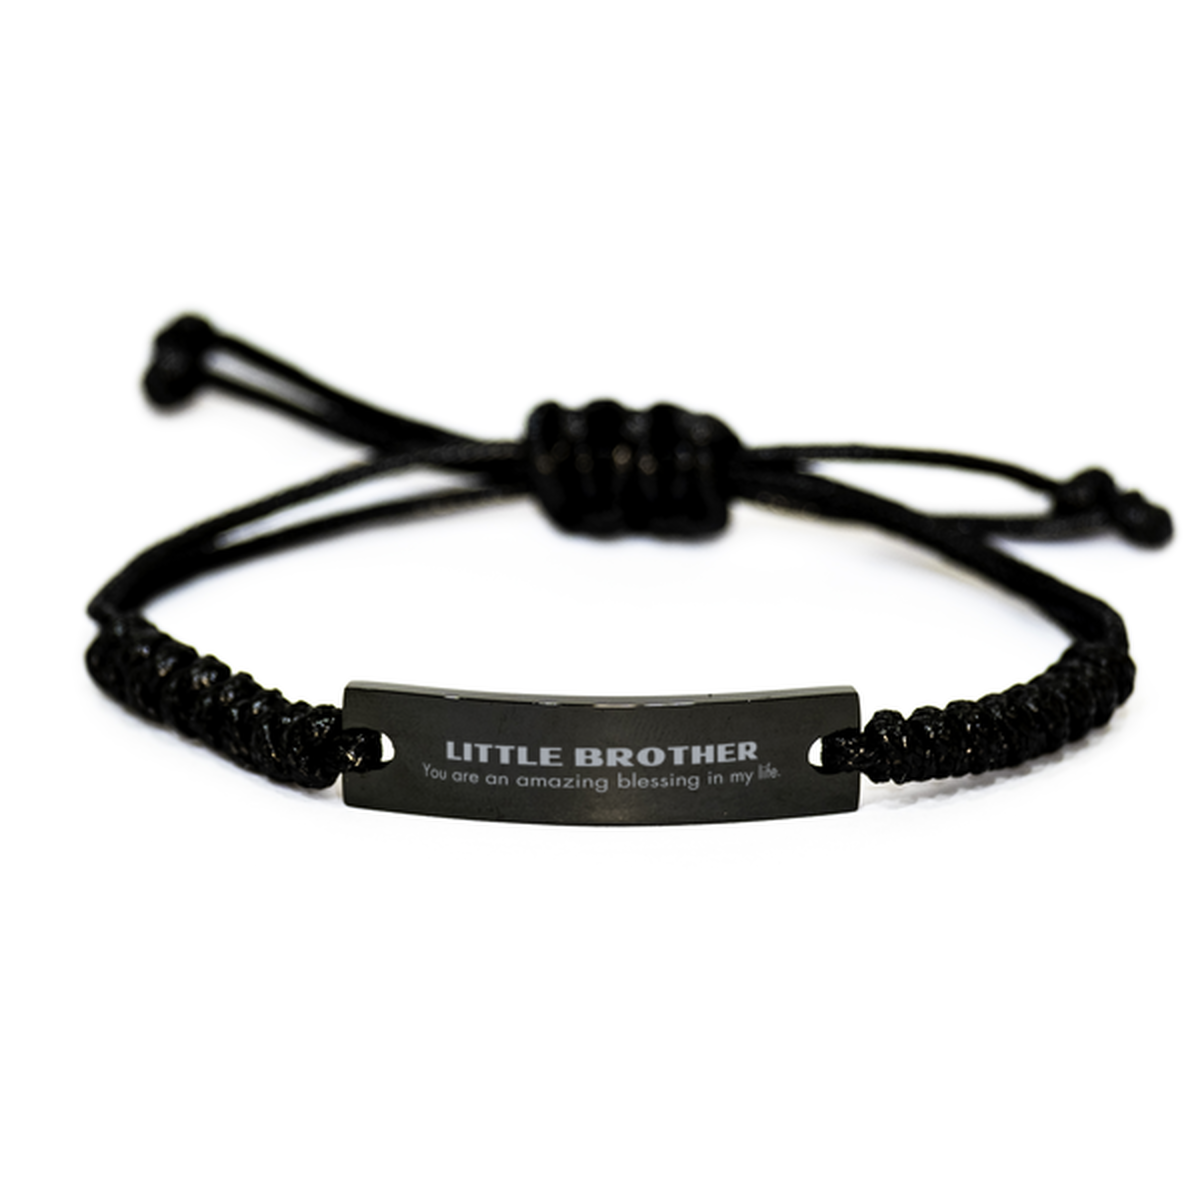 Little Brother Black Rope Bracelet, You are an amazing blessing in my life, Thank You Gifts For Little Brother, Inspirational Birthday Christmas Unique Gifts For Little Brother